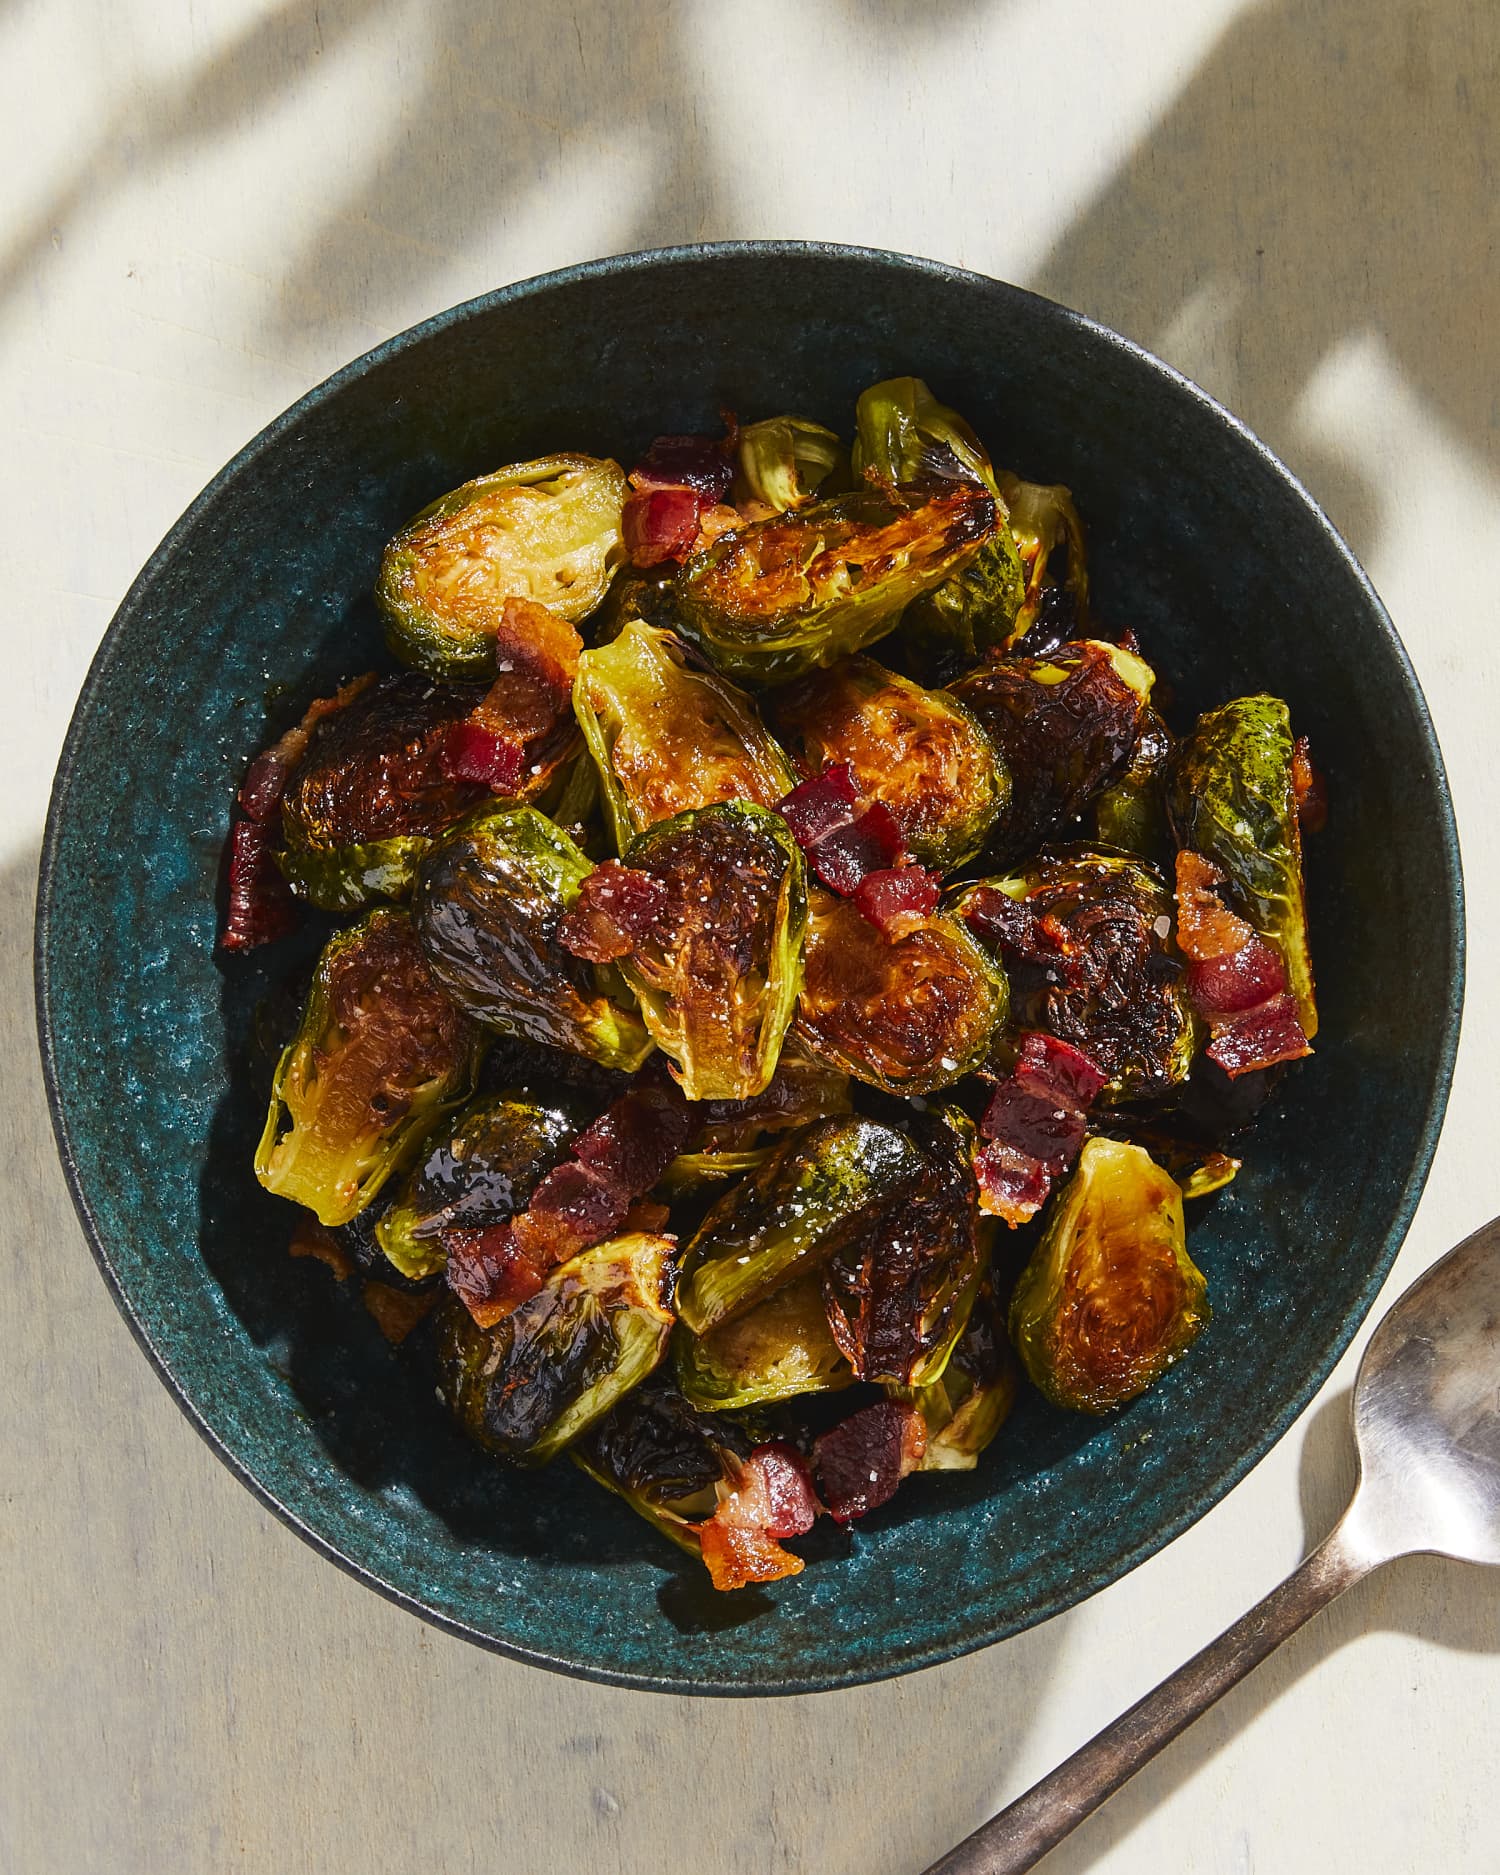 Maple Bacon Brussels Sprouts Are Perfectly Sweet and Salty